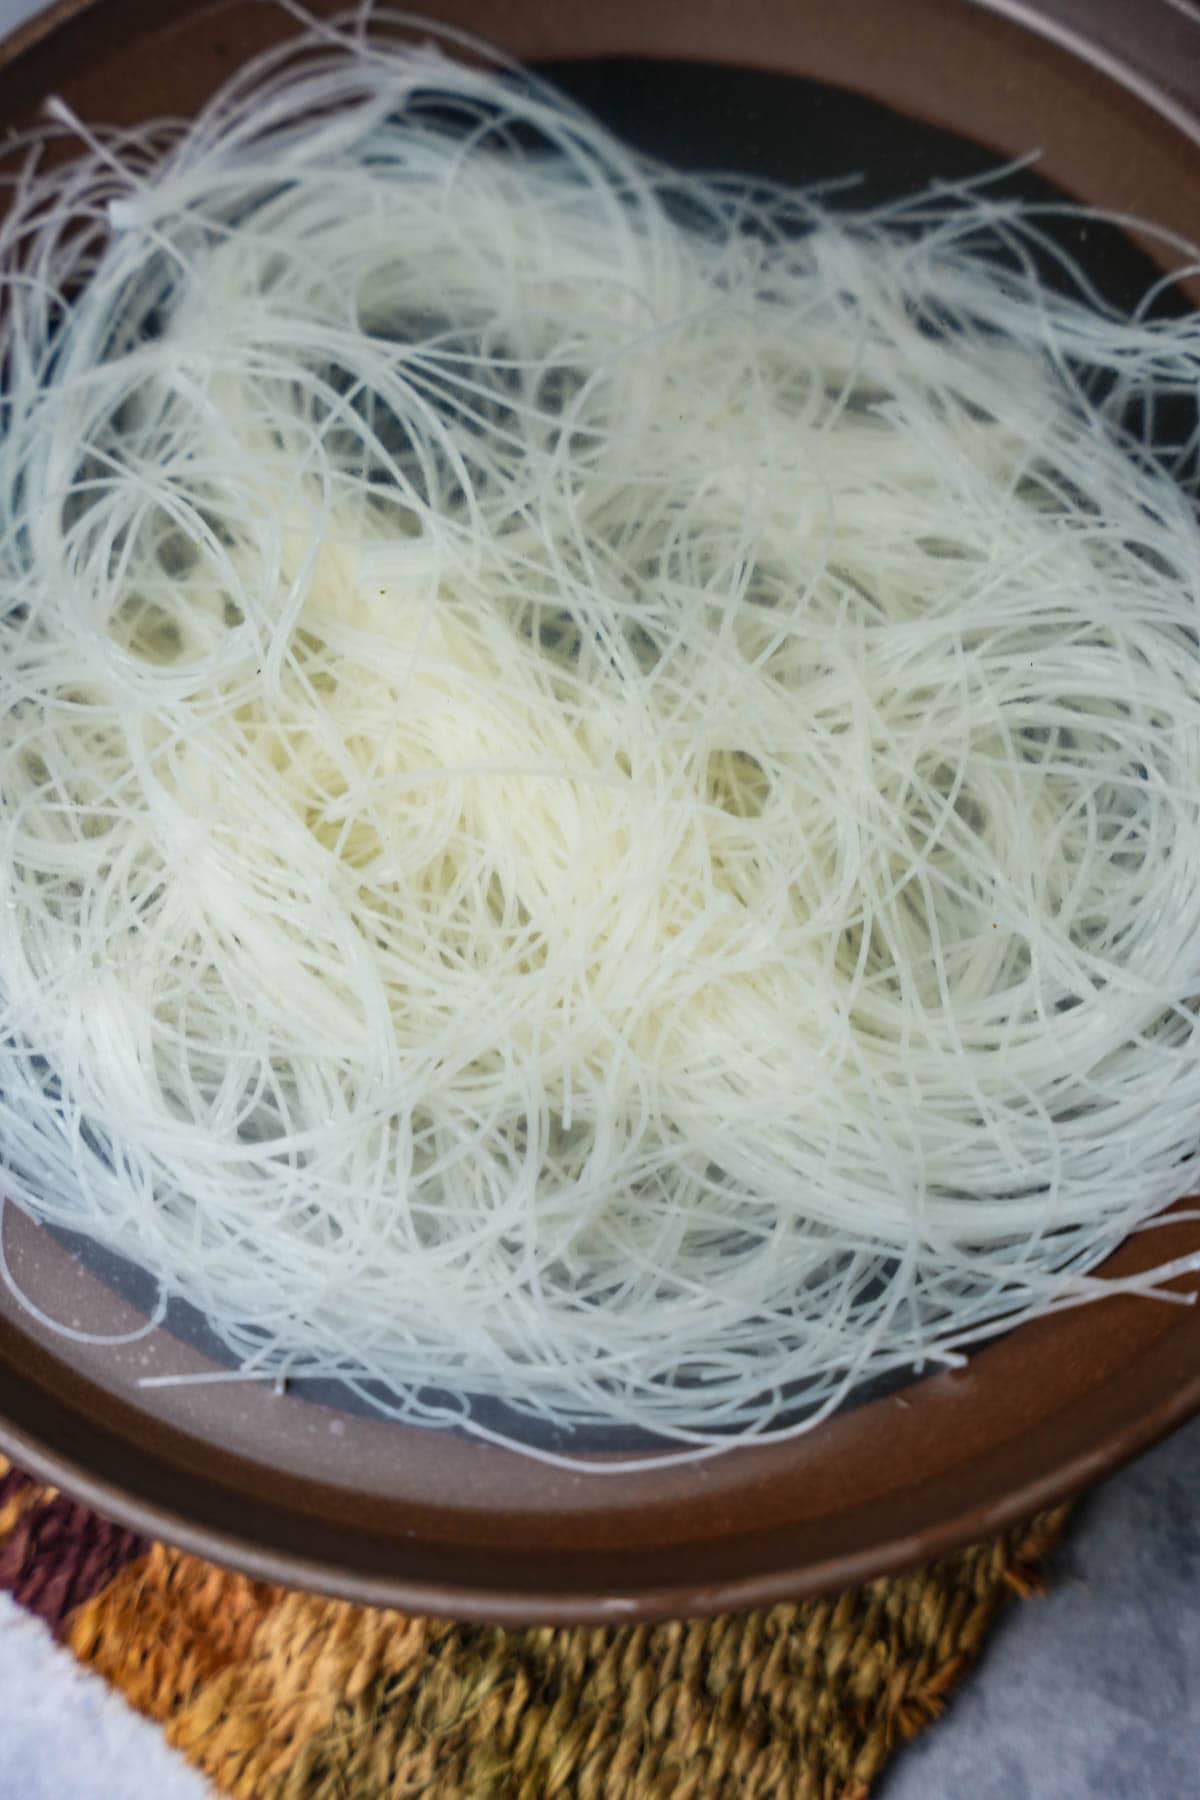 Rice noodles soaking in a bowl of water to rehydrate.